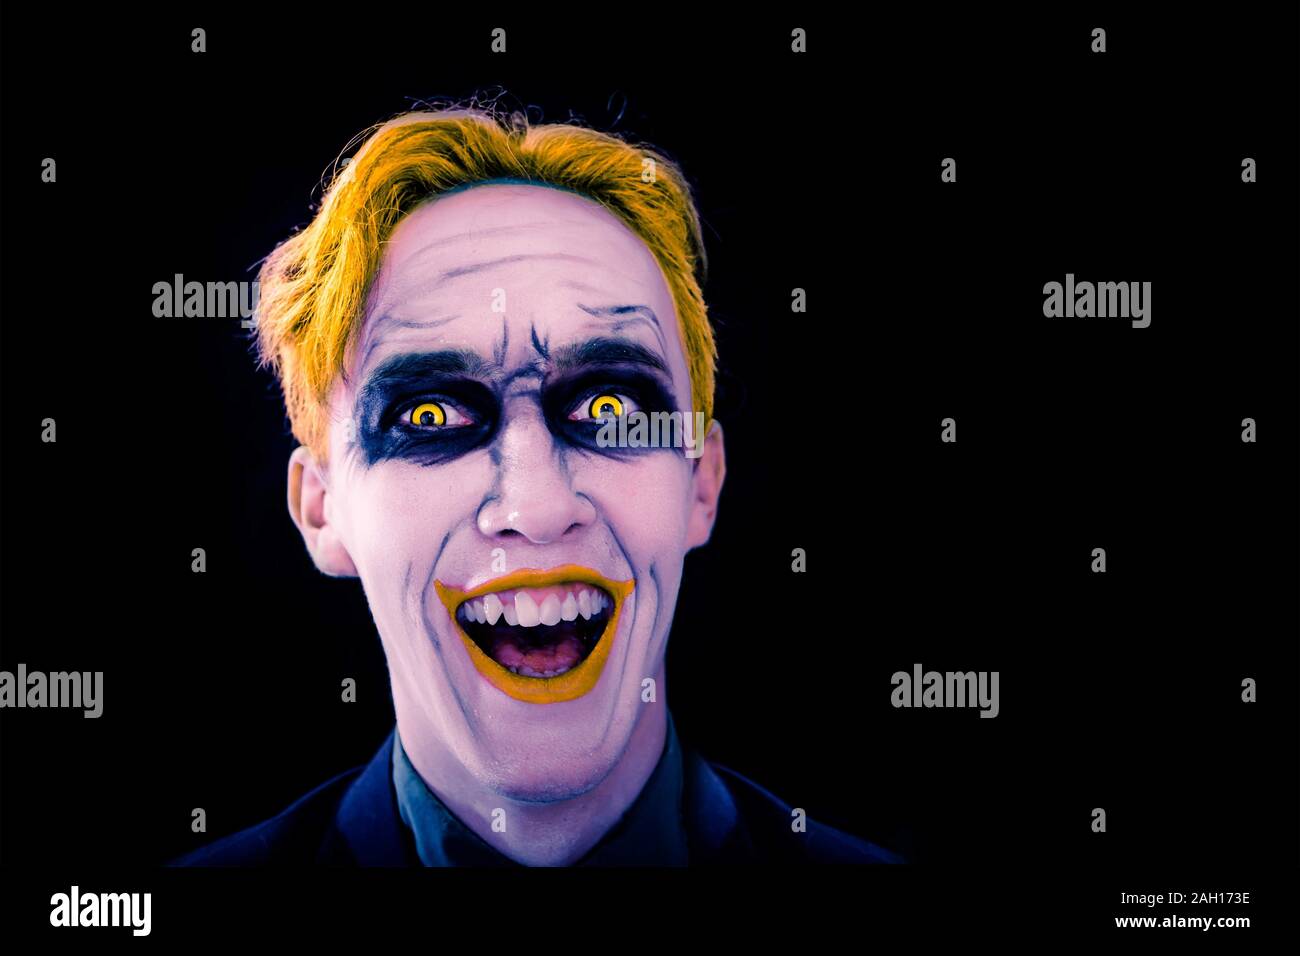 Cosplay joker from the movie 50's. Smiling clown on the black background. Halloween party. Copy space for text. Stock Photo